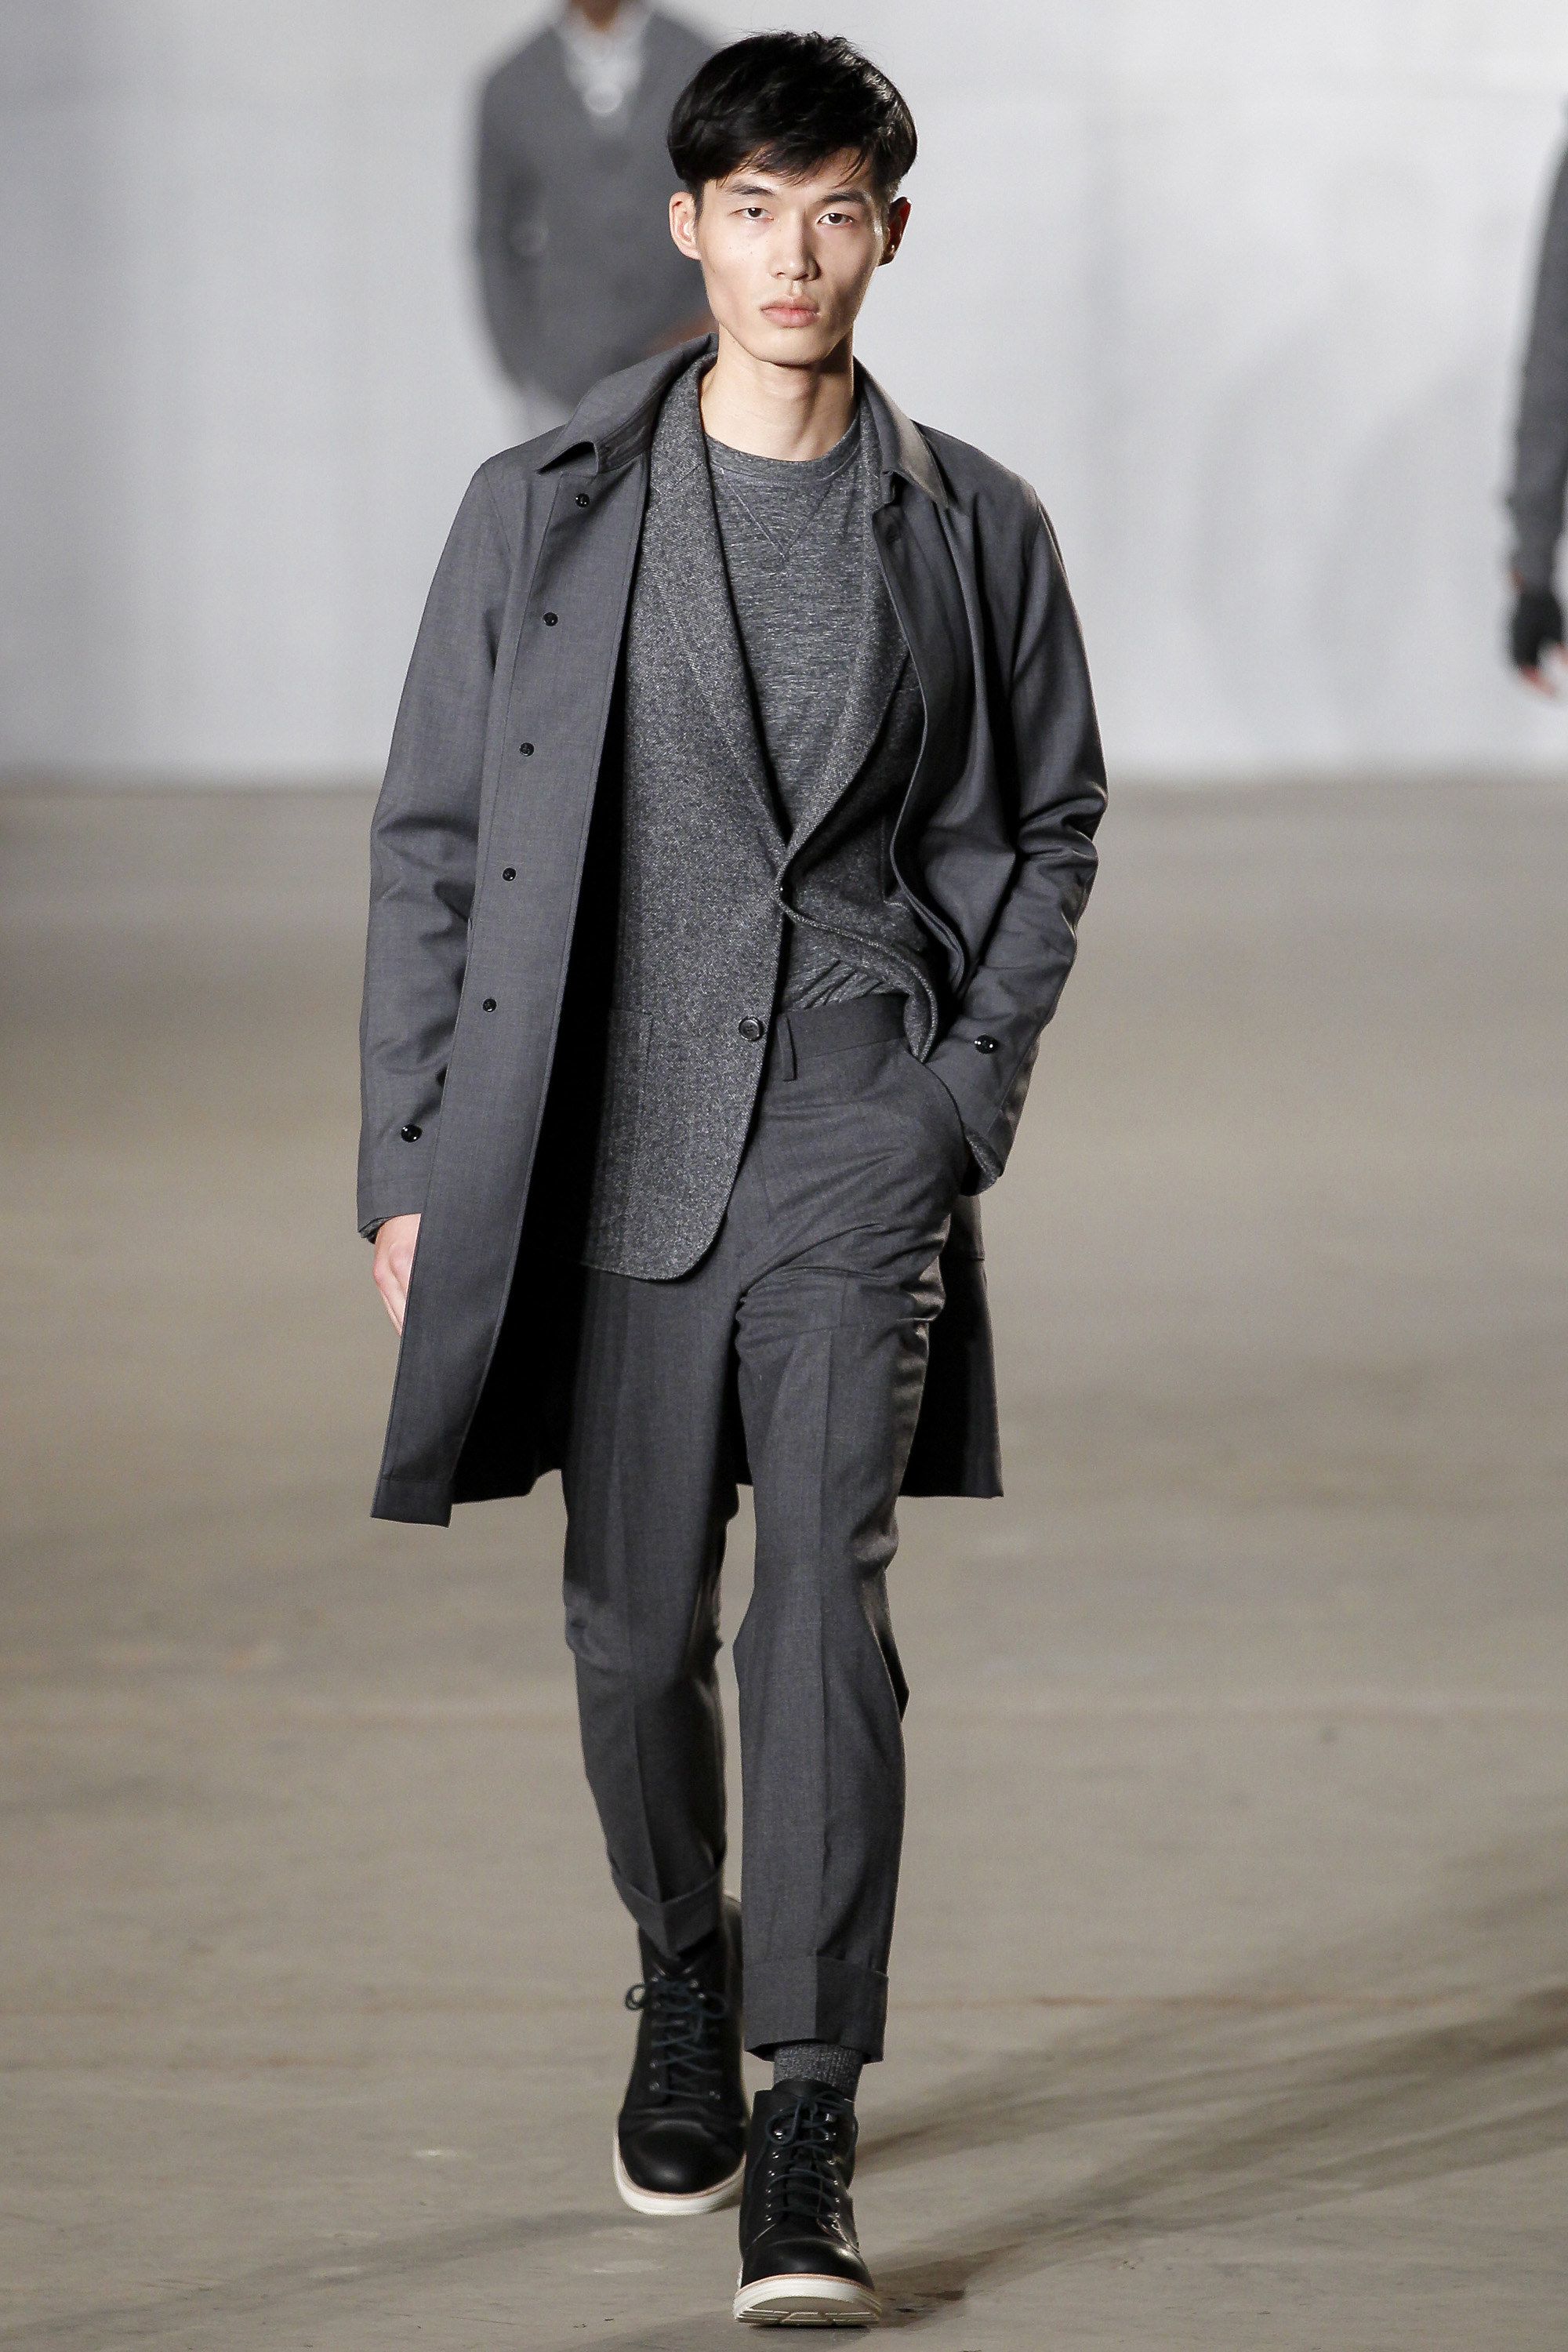 Todd Snyder Fall/Winter 2016 New York - Fashionably Male